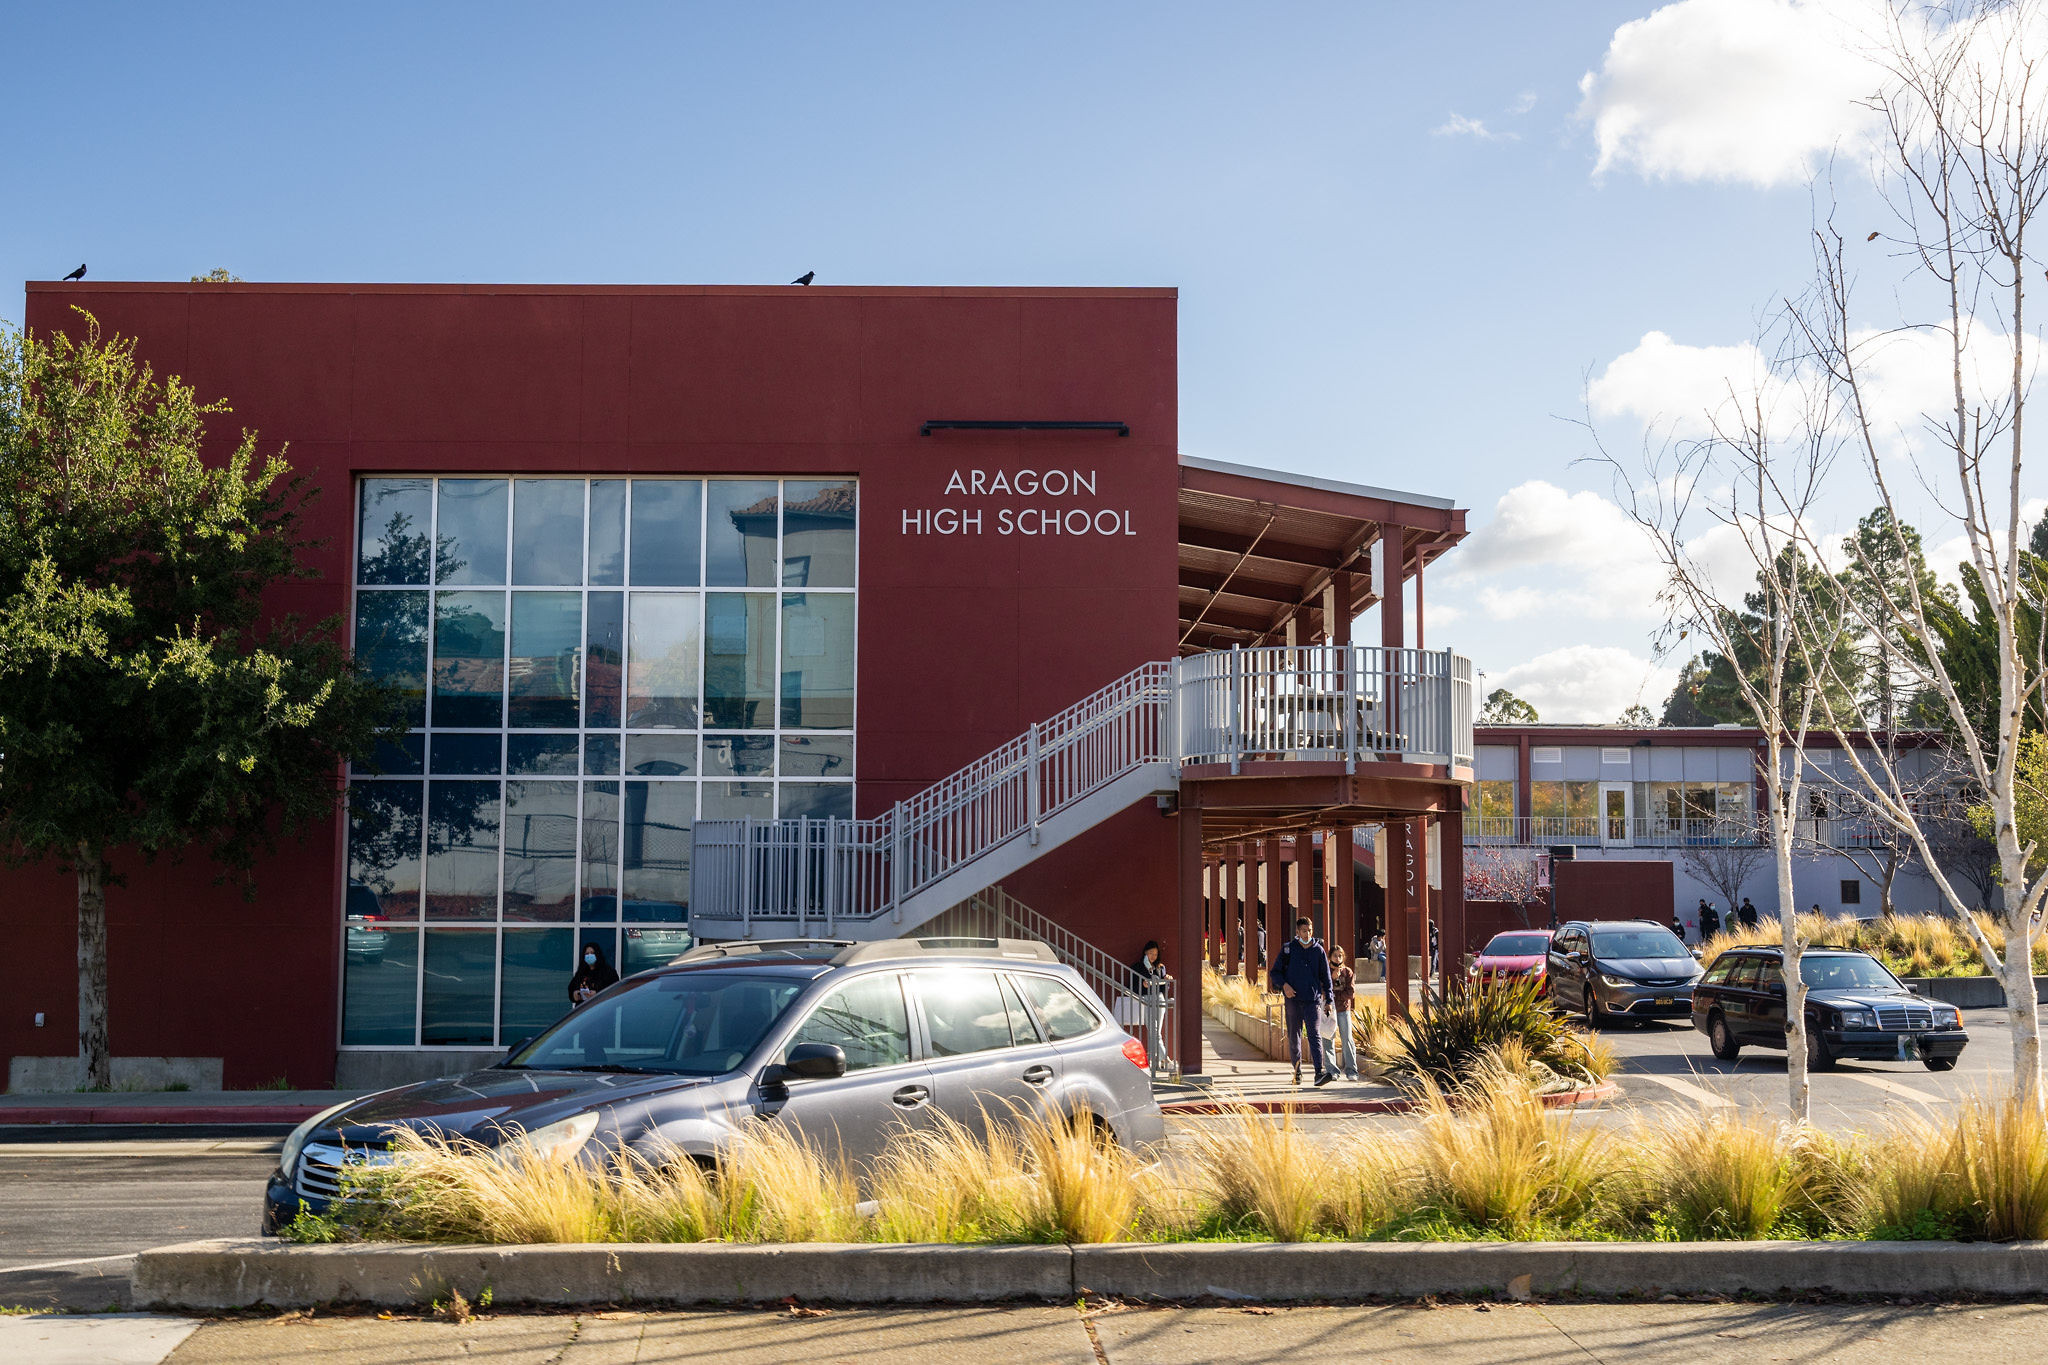 Aragon Aragon High School with red exterior finish in San Mateo.